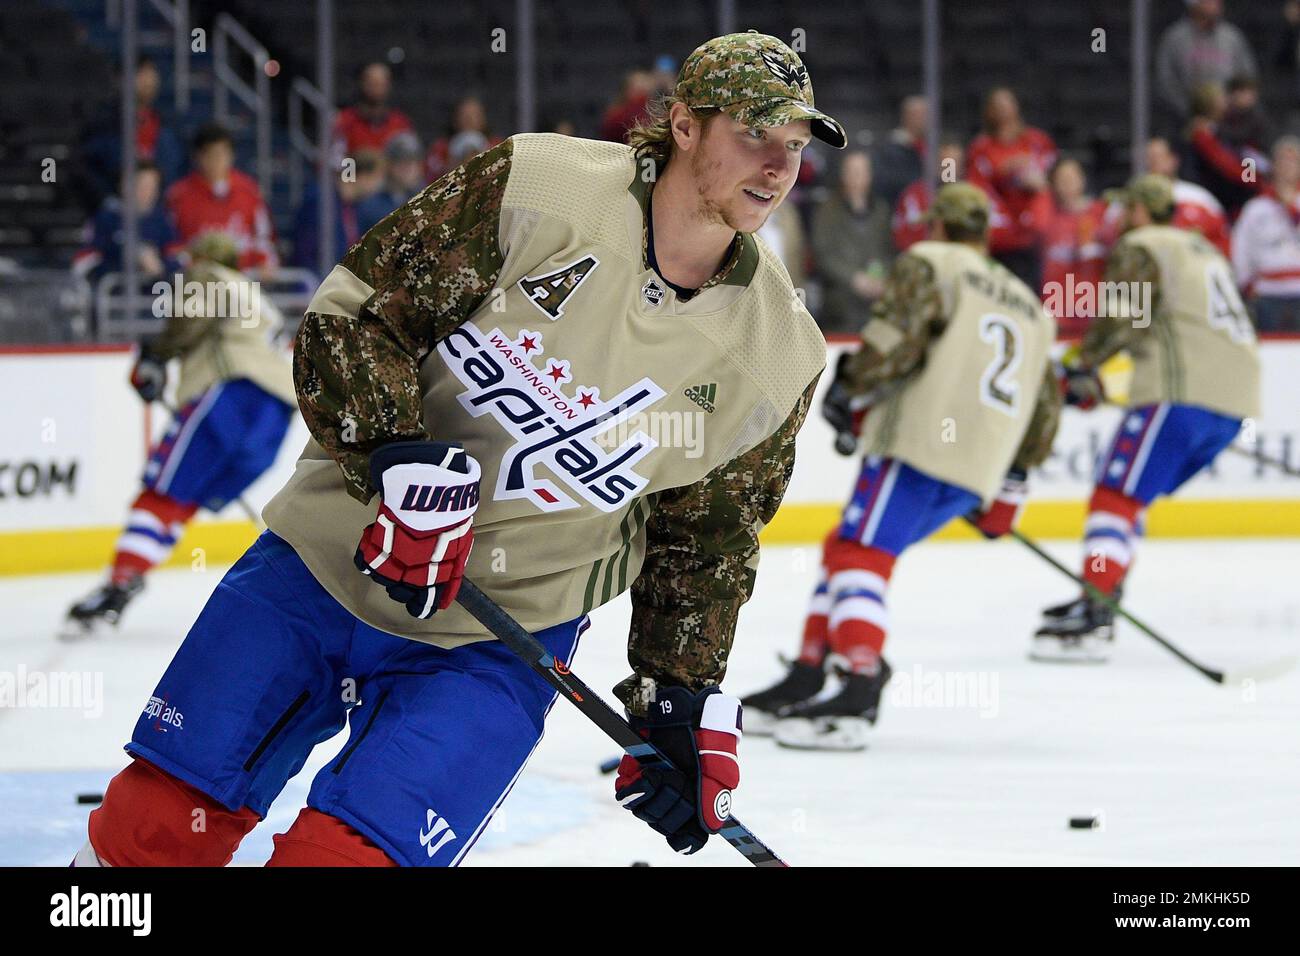 The Capitals will wear special camo jerseys during warmups for Military  Night